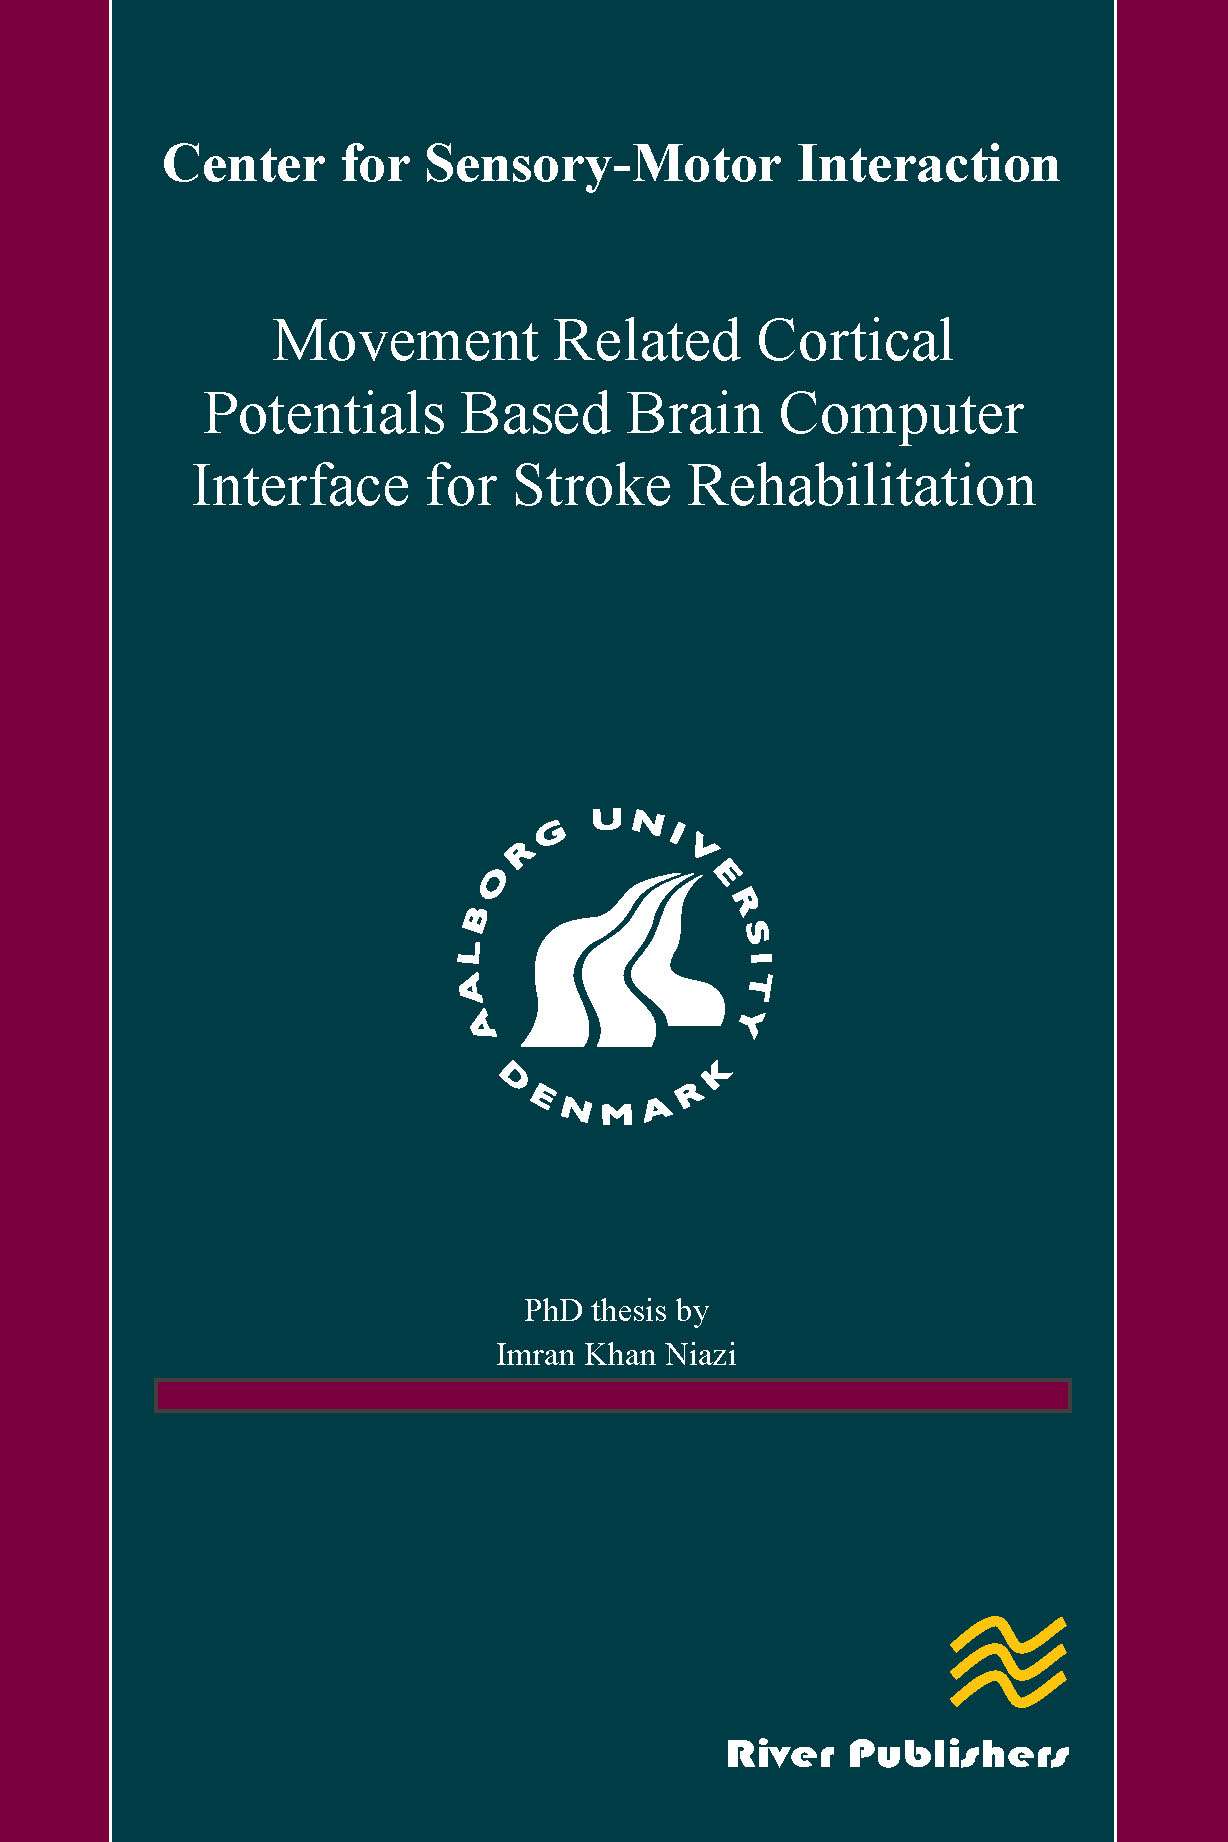 Movement Related Cortical Potentials Based Brain Computer Interface for Stroke Rehabilitation